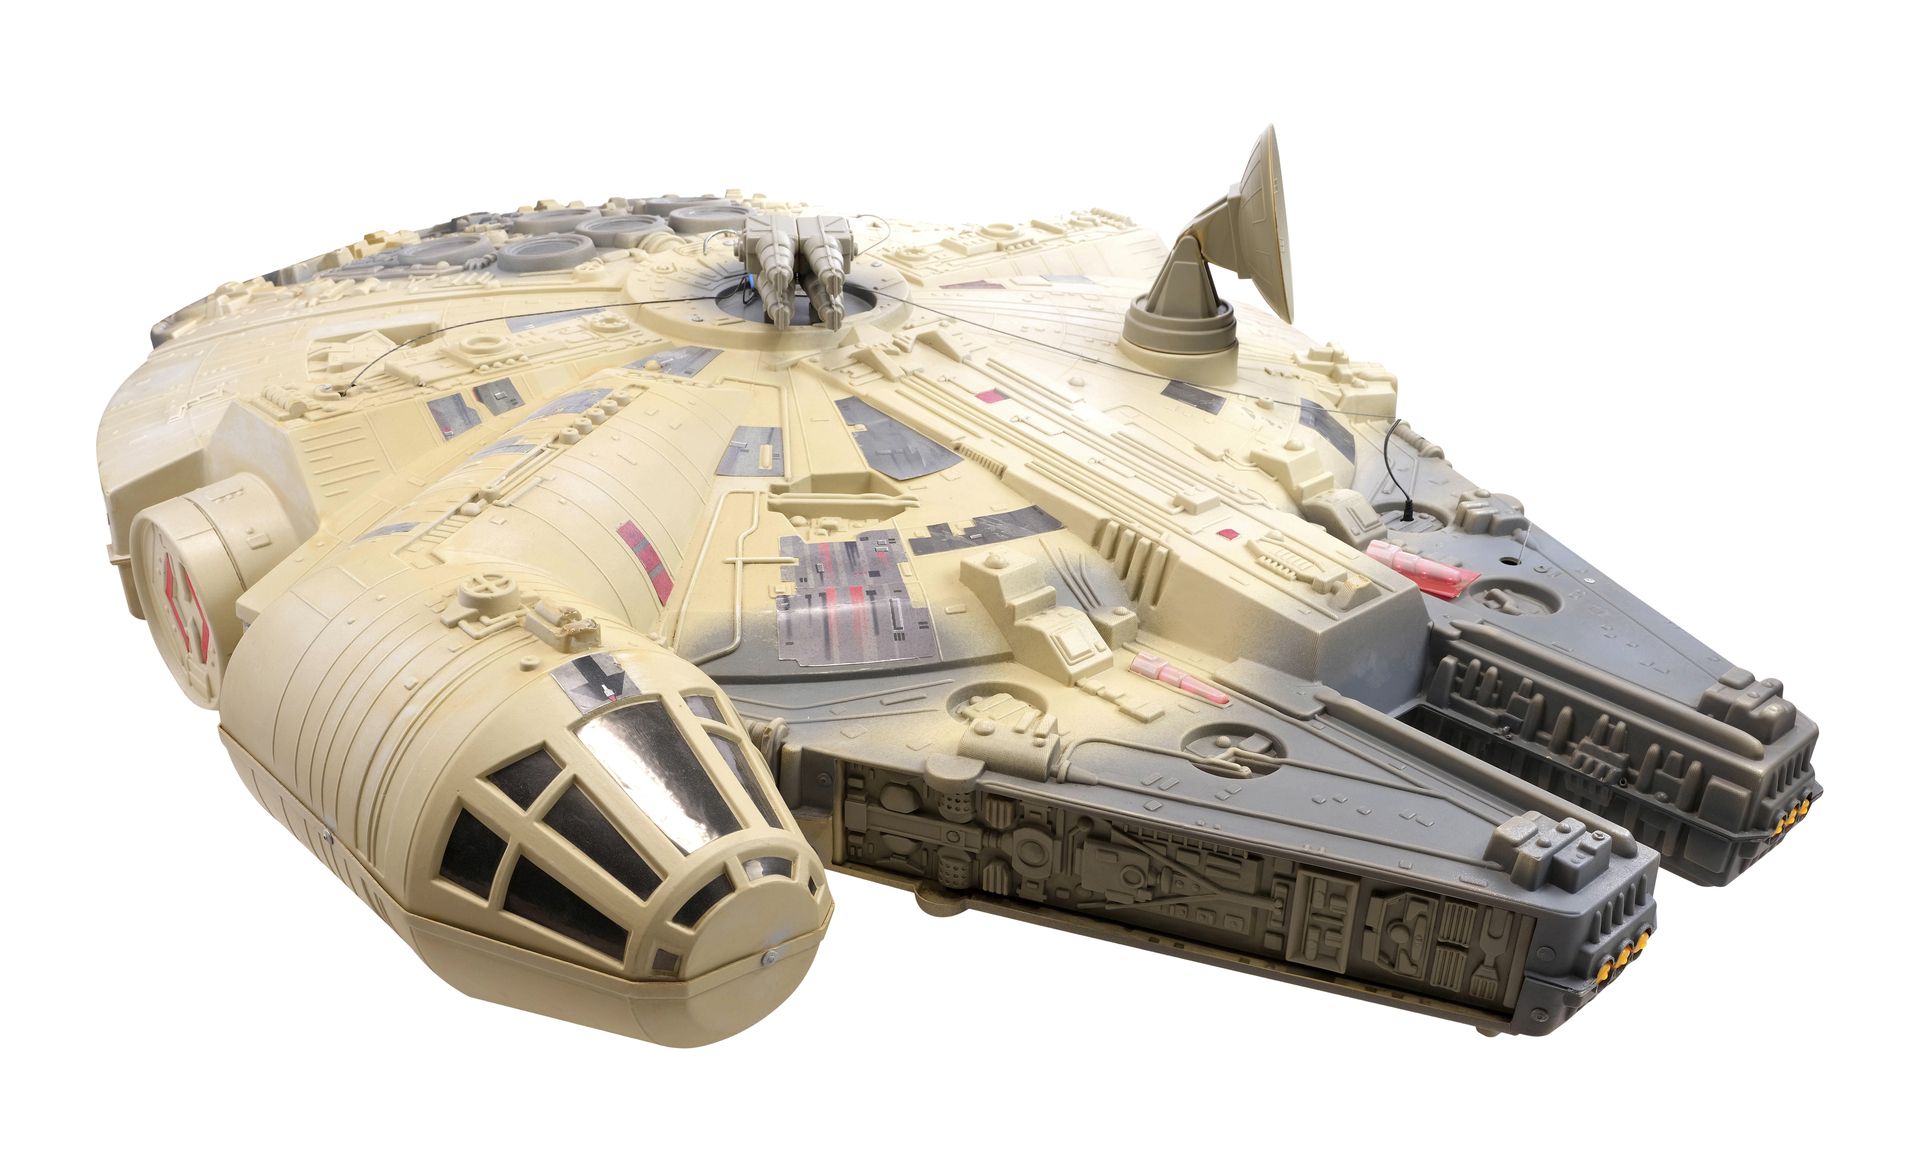 STAR WARS TOYS - Light-Up Toys-R-Us Millennium Falcon "Extraordinaire" Promotional Display